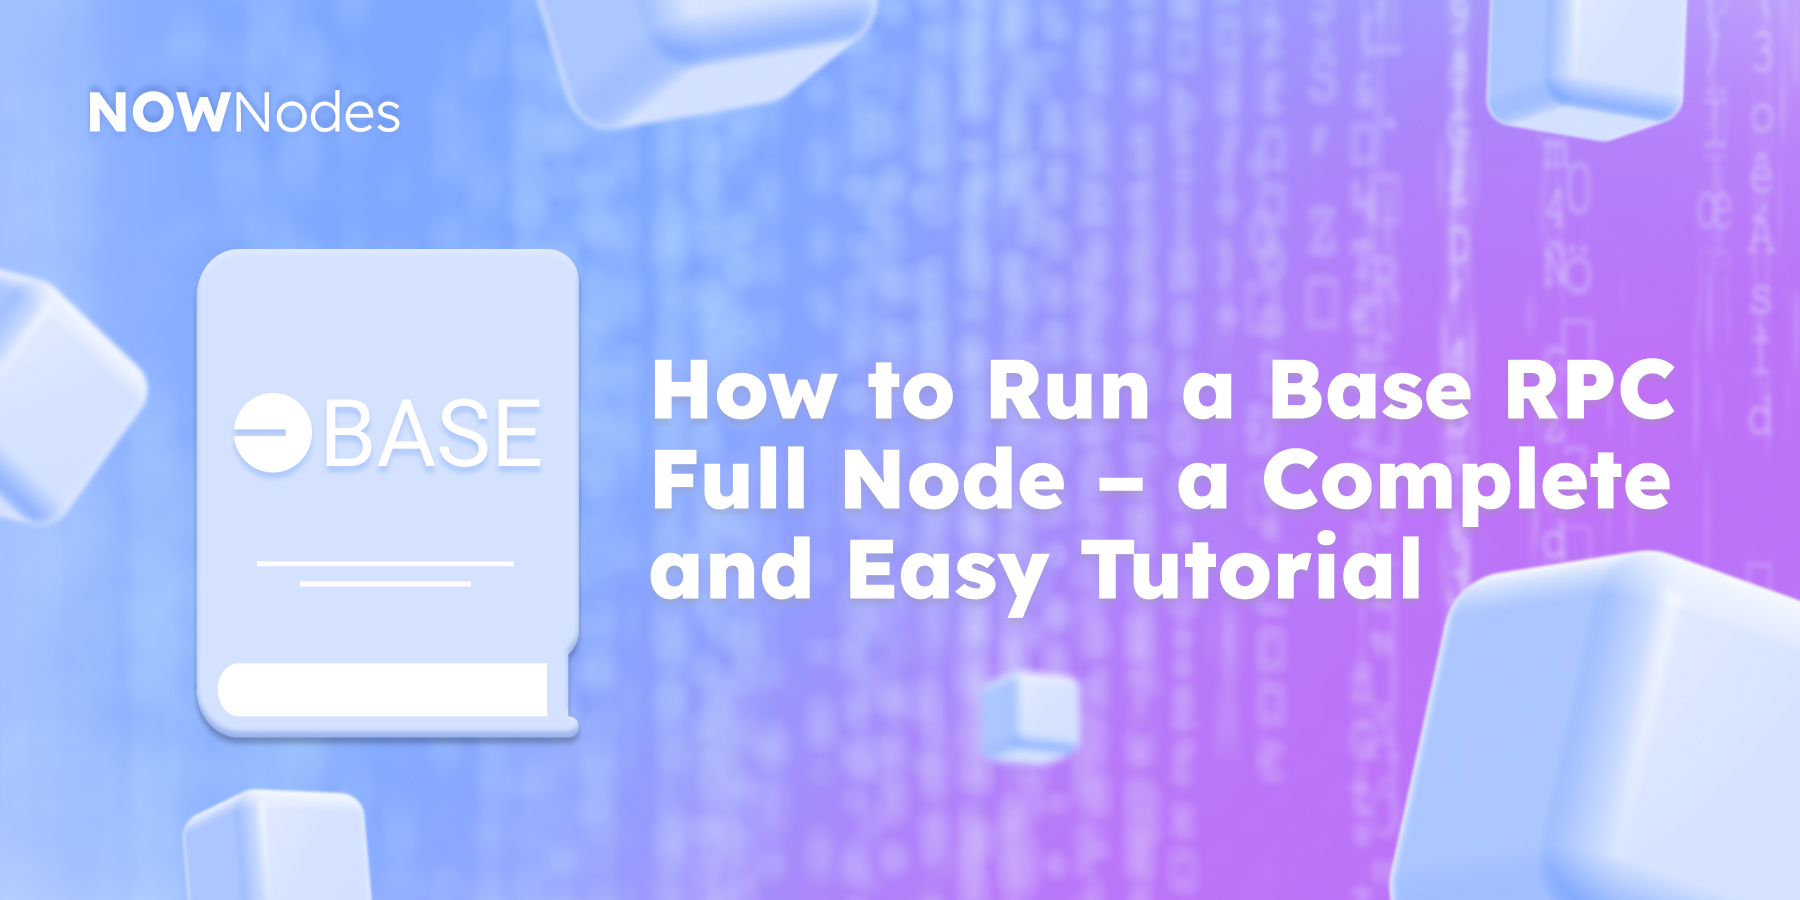 How to Run a Base RPC Full Node - a Complete and Easy Tutorial